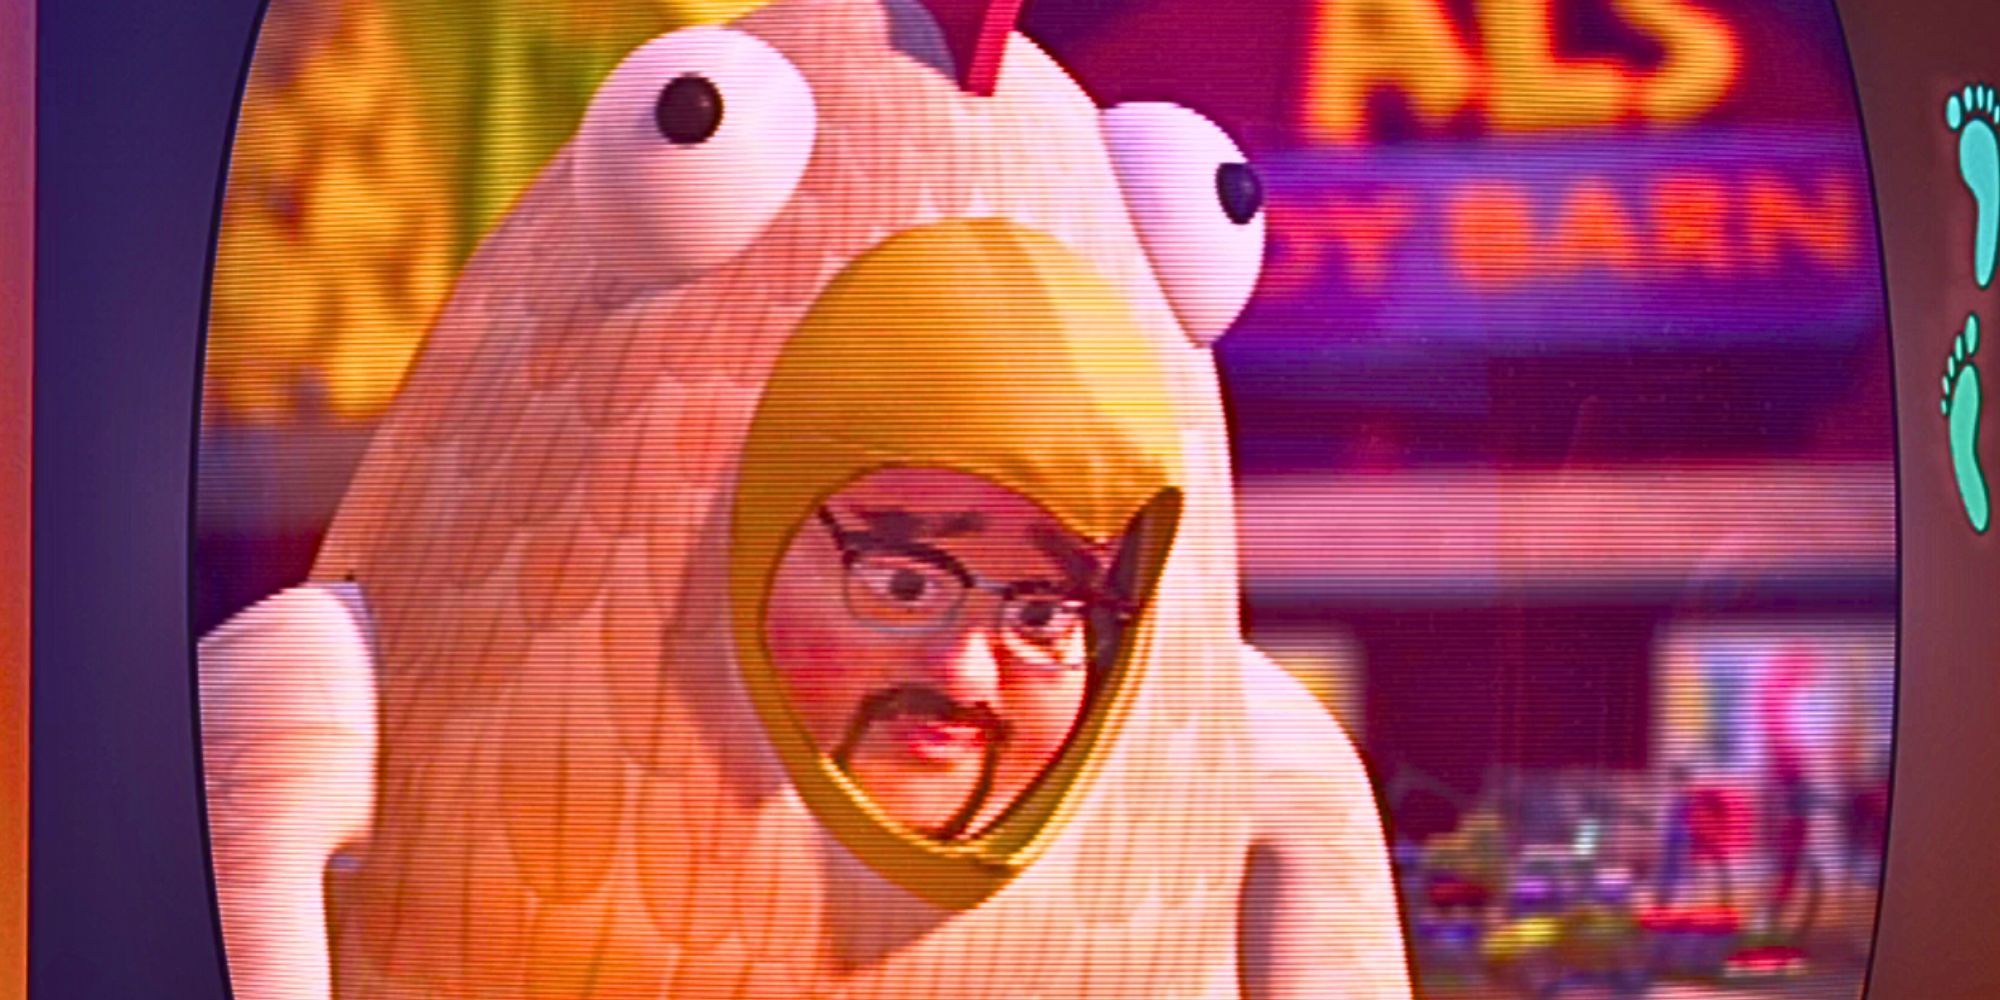 Al dressed as a chicken and looking sad in Toy Story 2